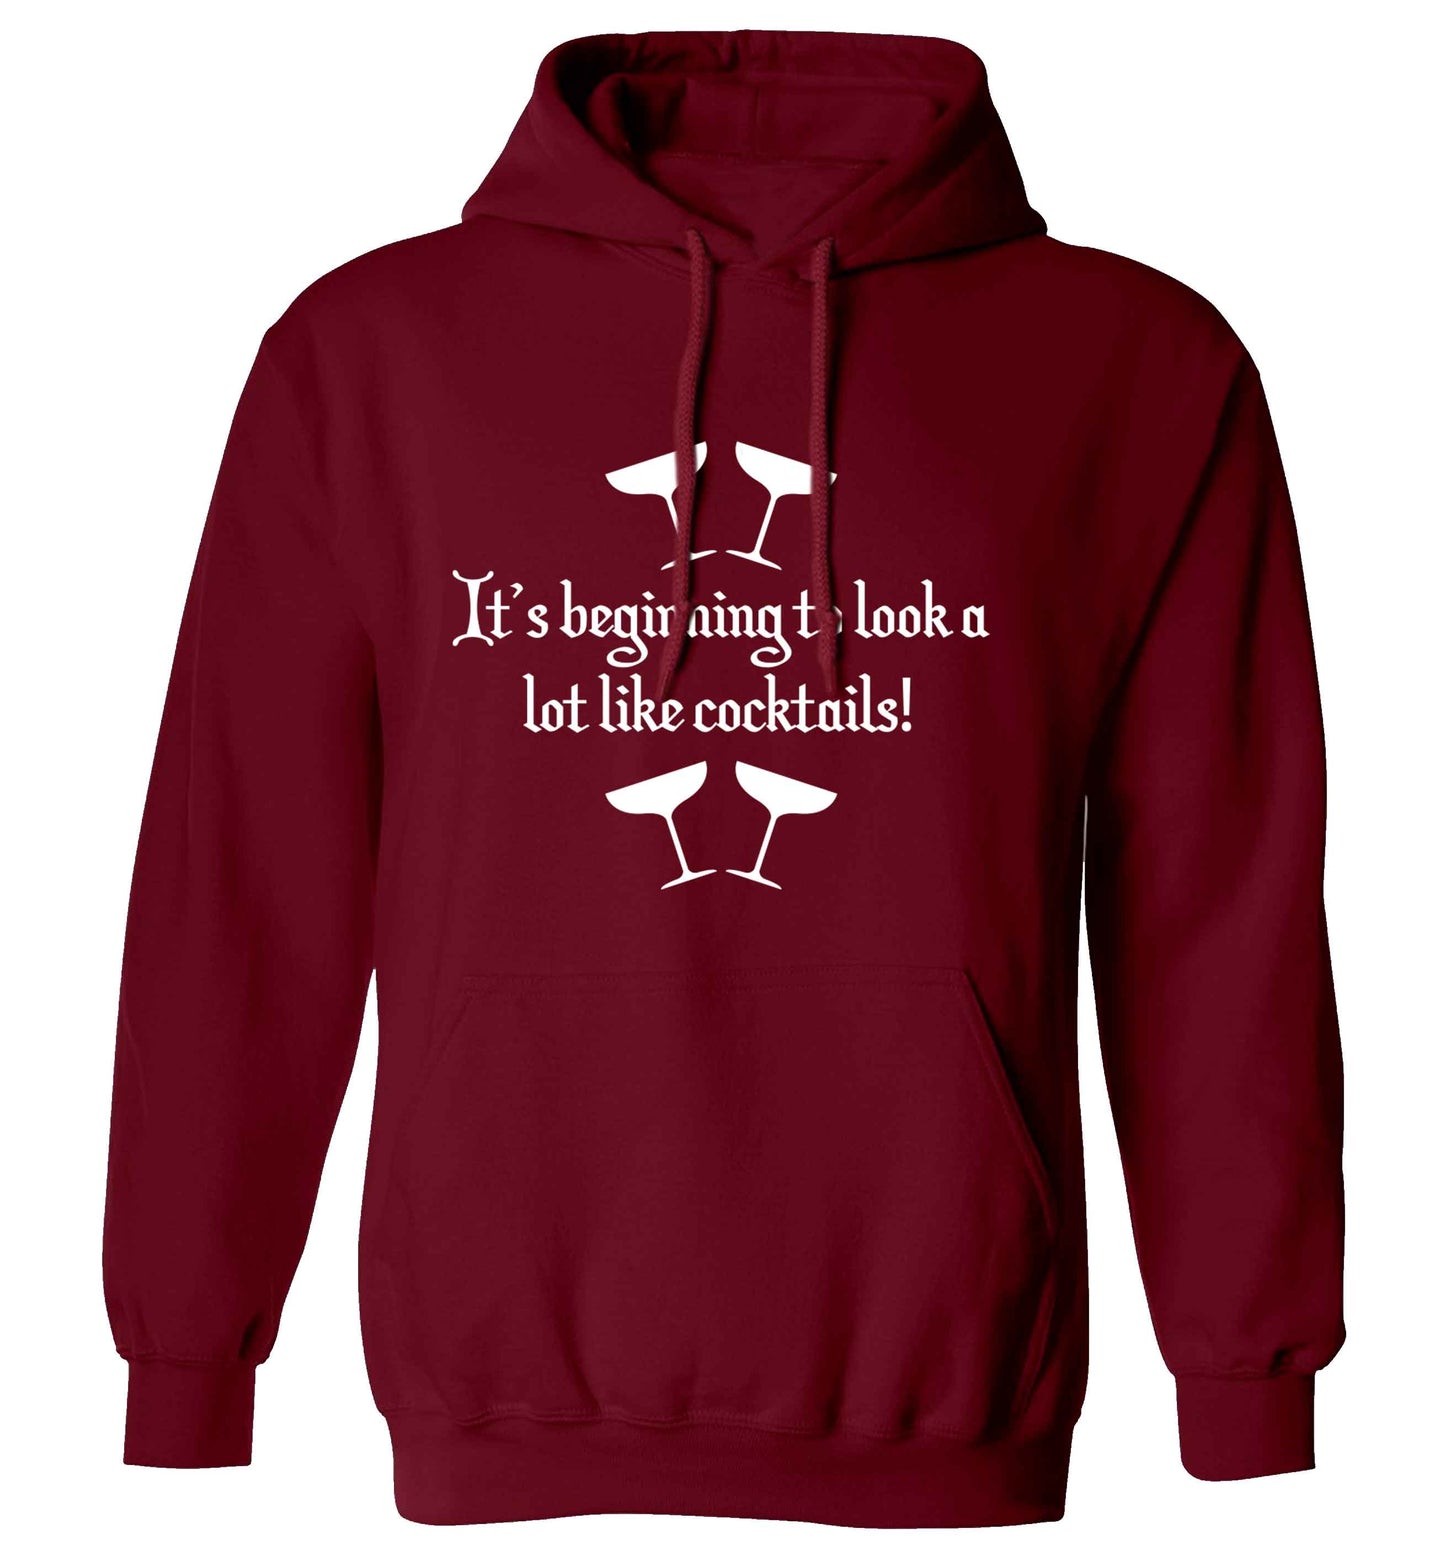 It's beginning to look a lot like cocktails adults unisex maroon hoodie 2XL